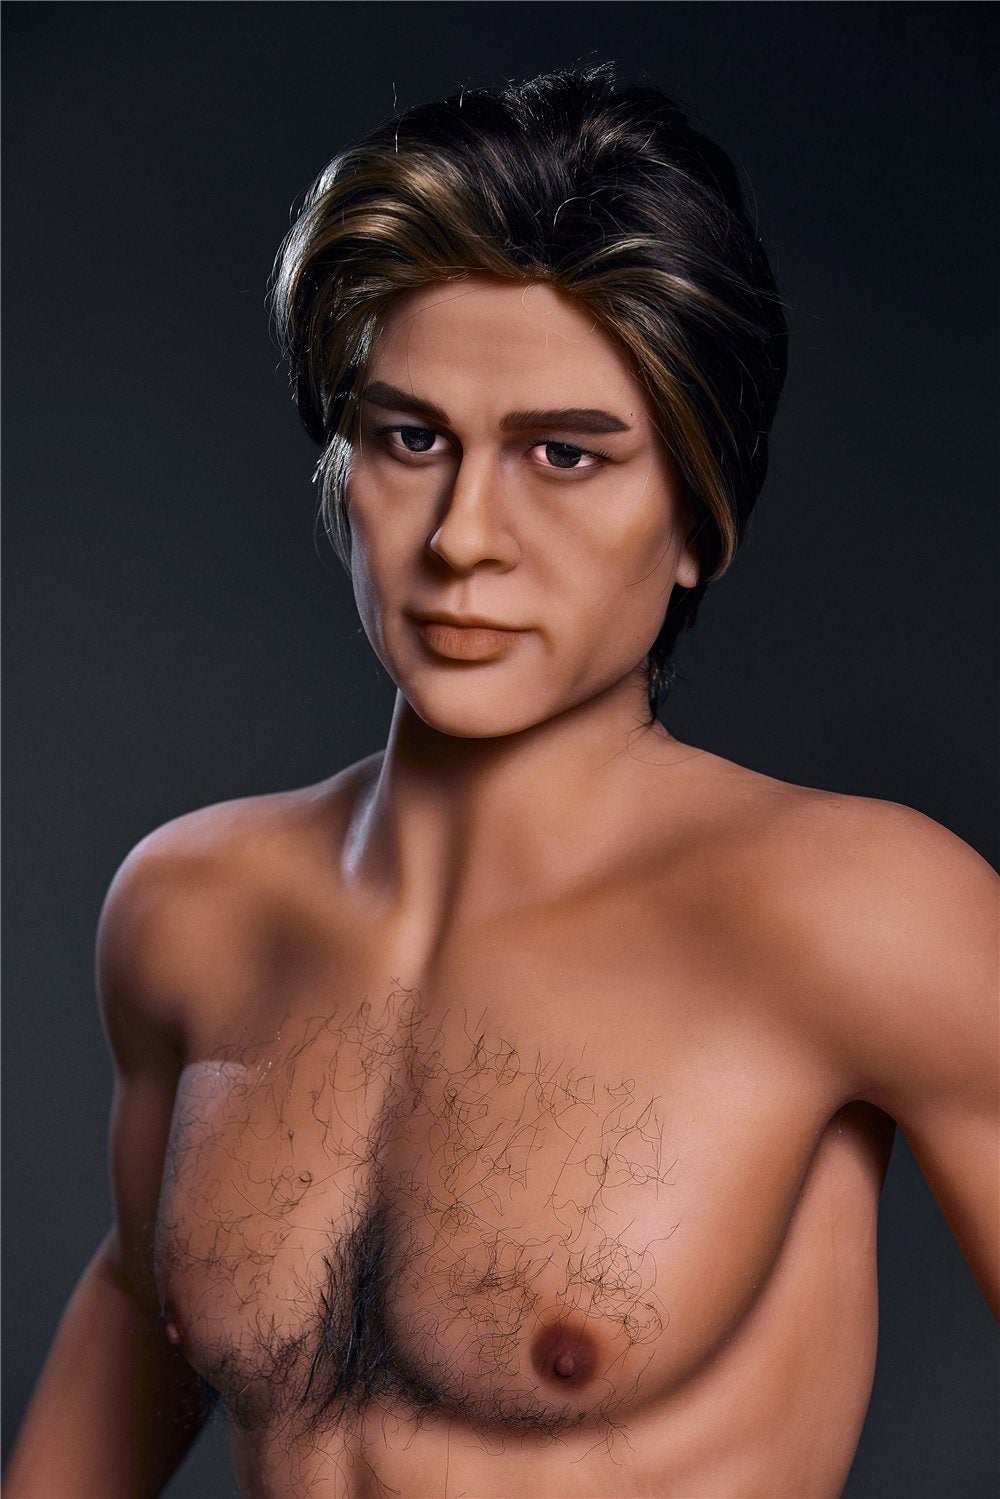 Charles Realistic Male Sex Doll - Iron Tech Doll Irontech Doll